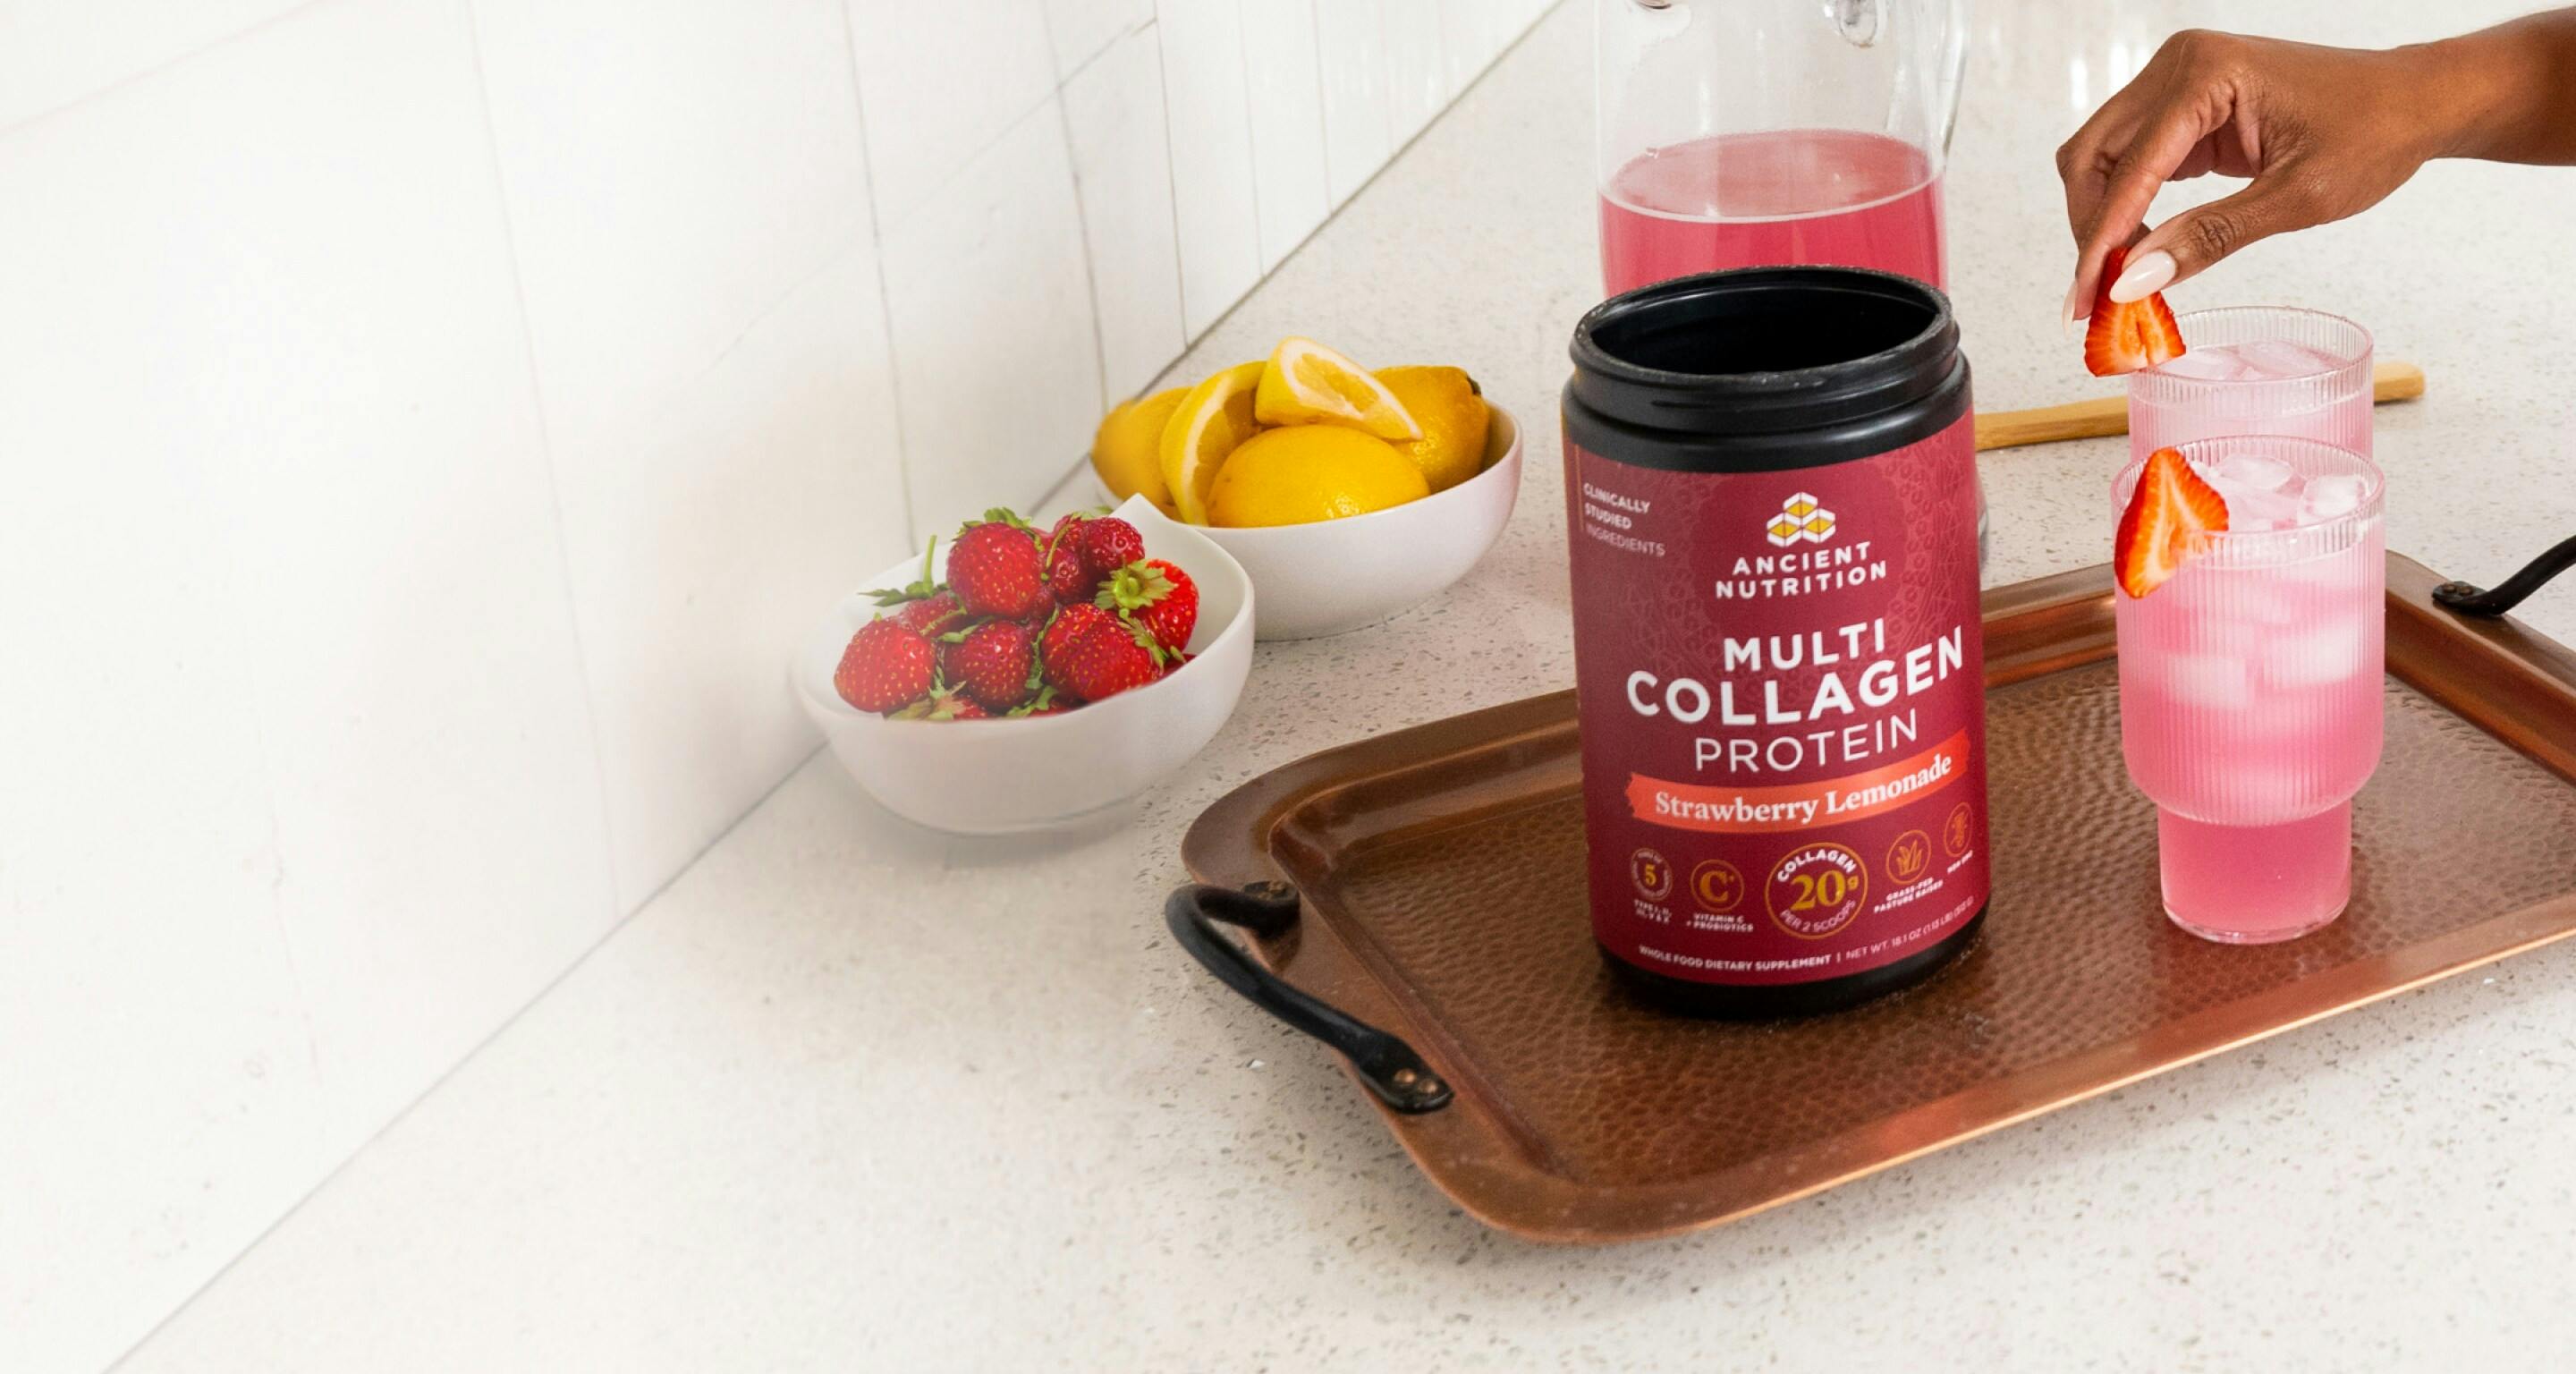 A container of Ancient Nutrition Multi Collagen Protein Strawberry Lemonade on a counter with a glass of it mixed in water with ice and a woman's hand.